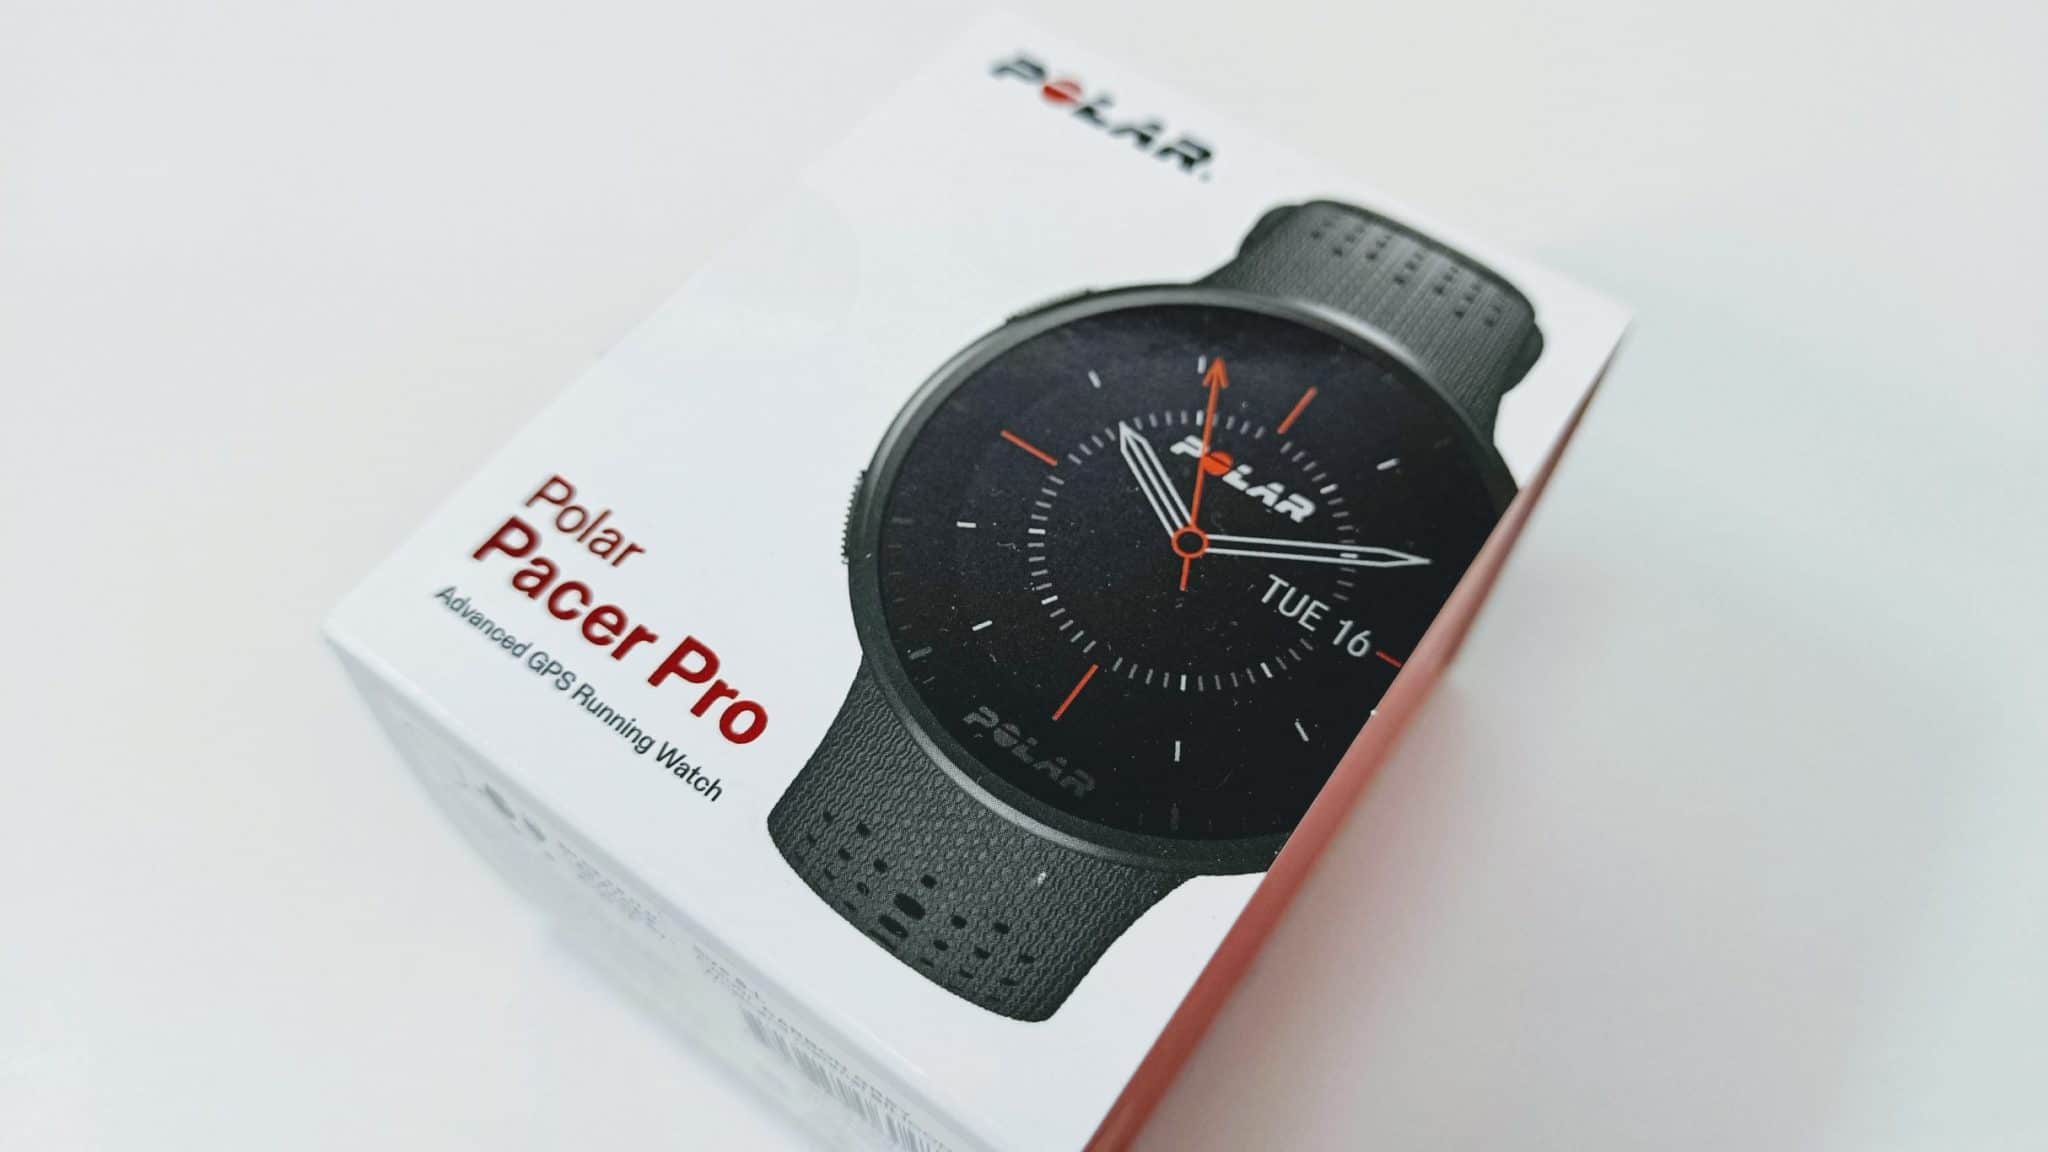 Polar Pacer Pro – the world's launch of a new running watch